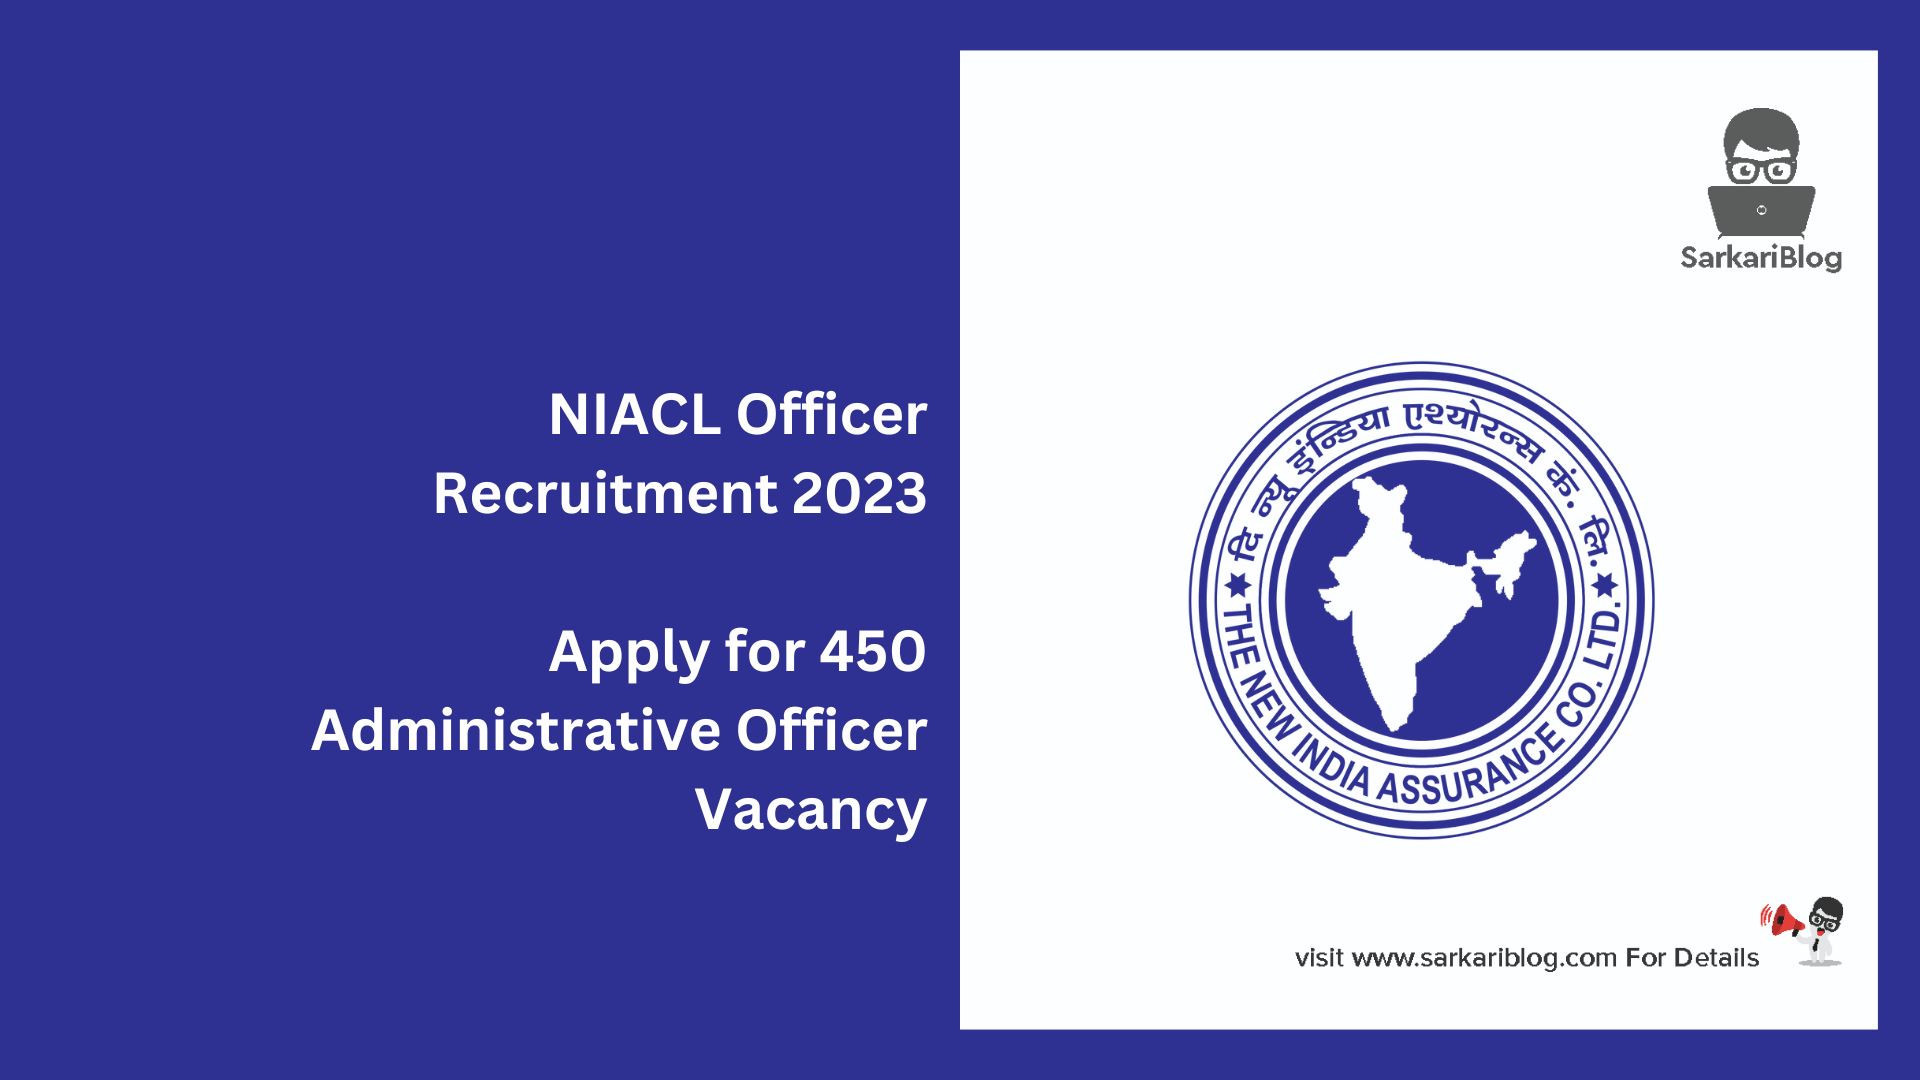 NIACL Officer Recruitment 2023